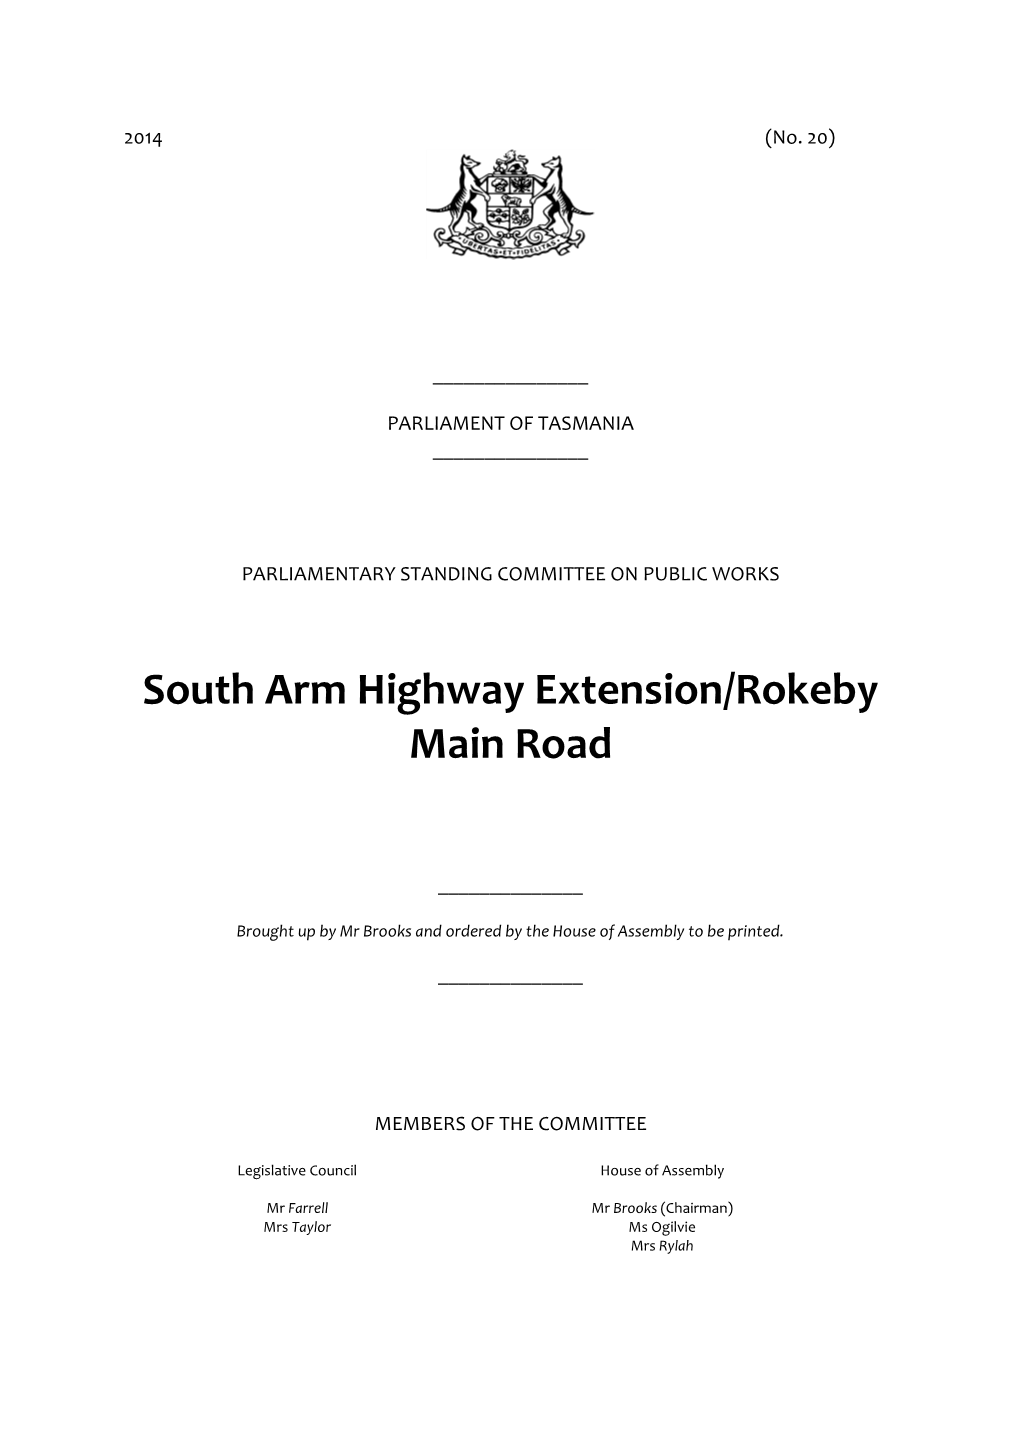 South Arm Highway Extension/Rokeby Main Road